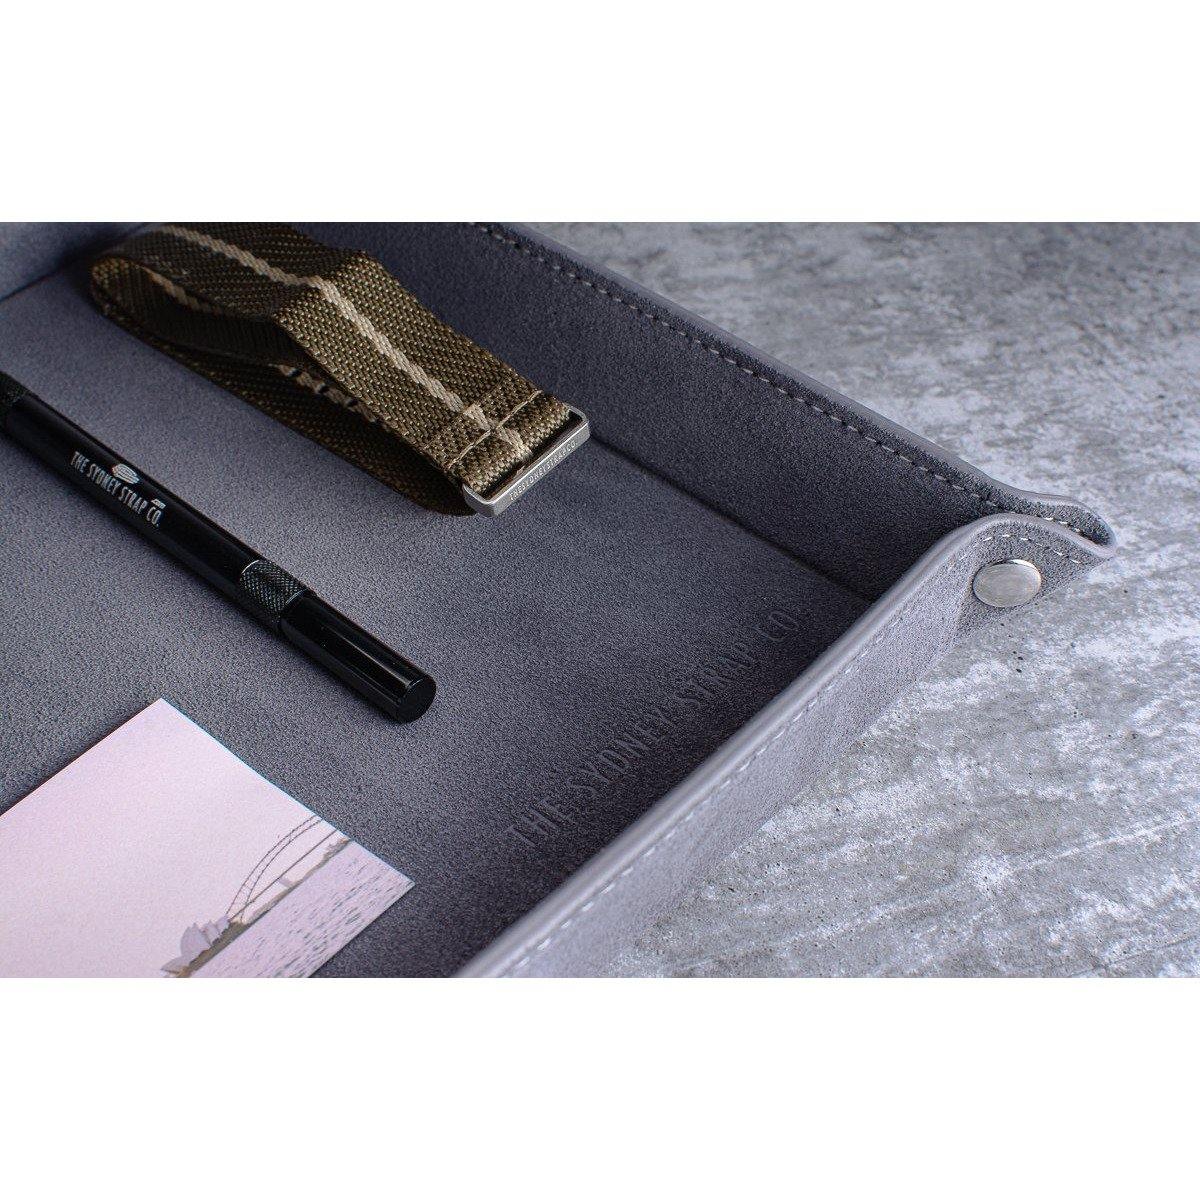 Grey Suede Valet Tray - The Sydney Strap Co.